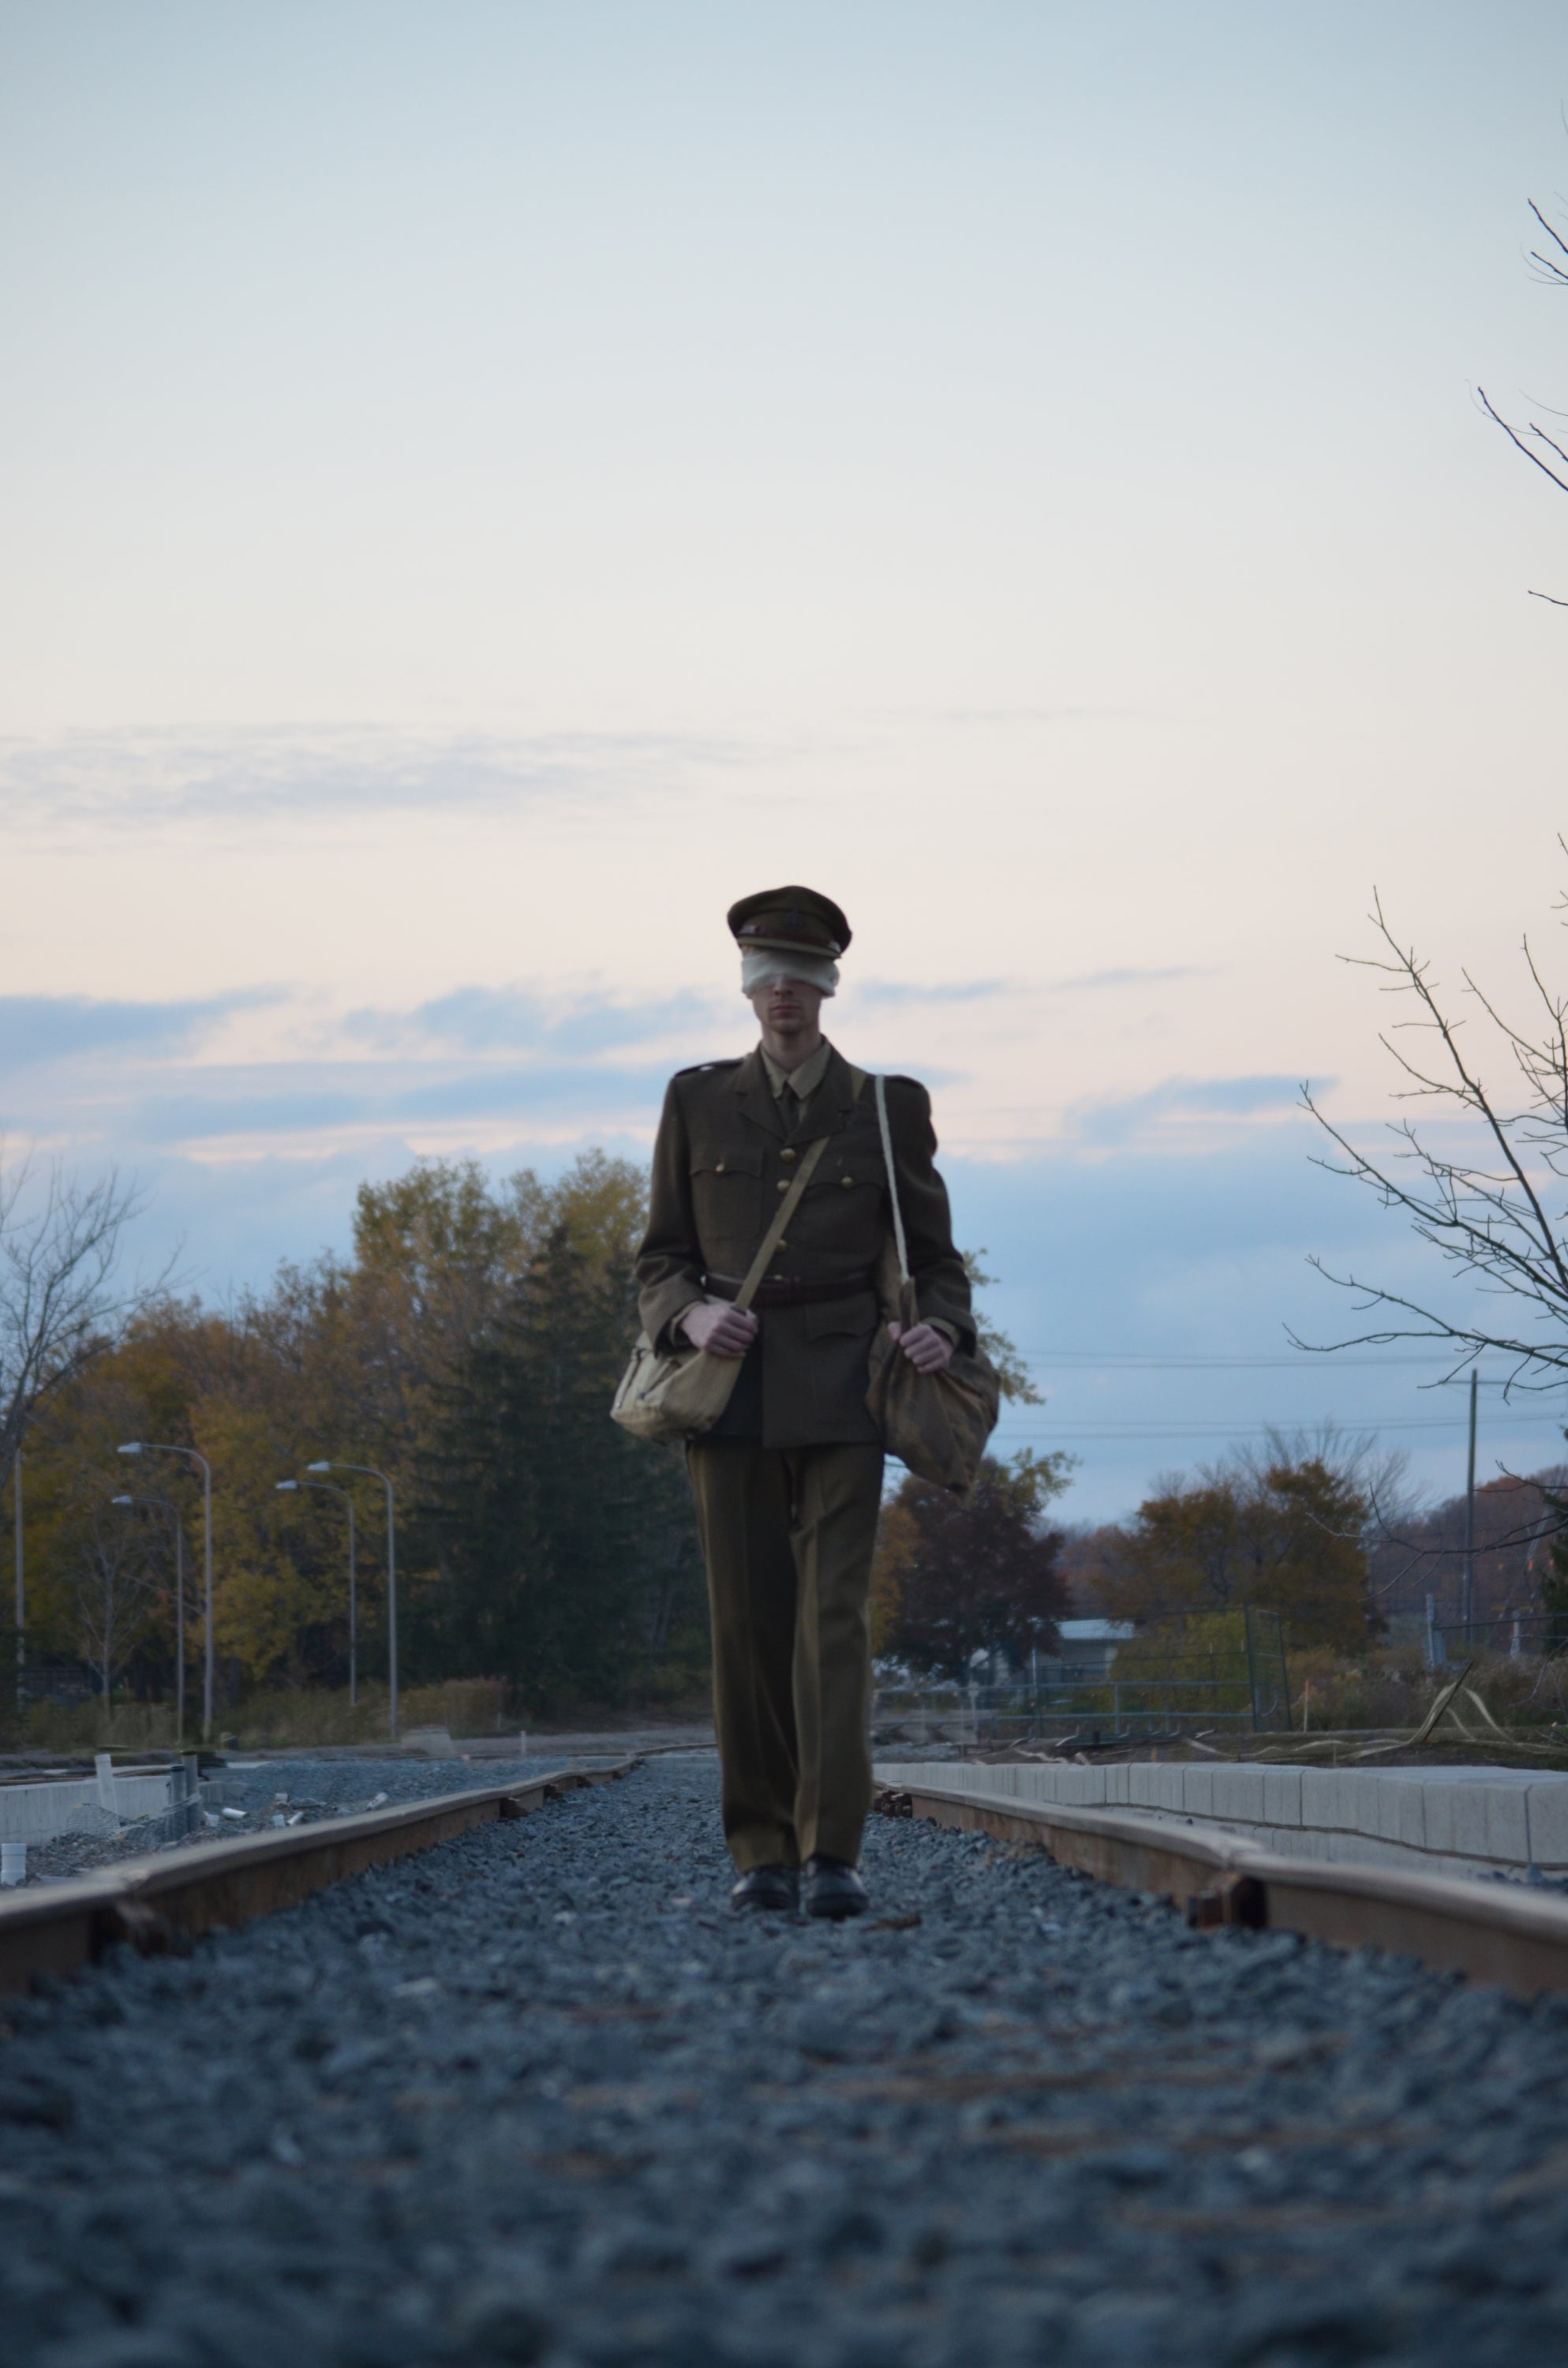 Solider walking a train track